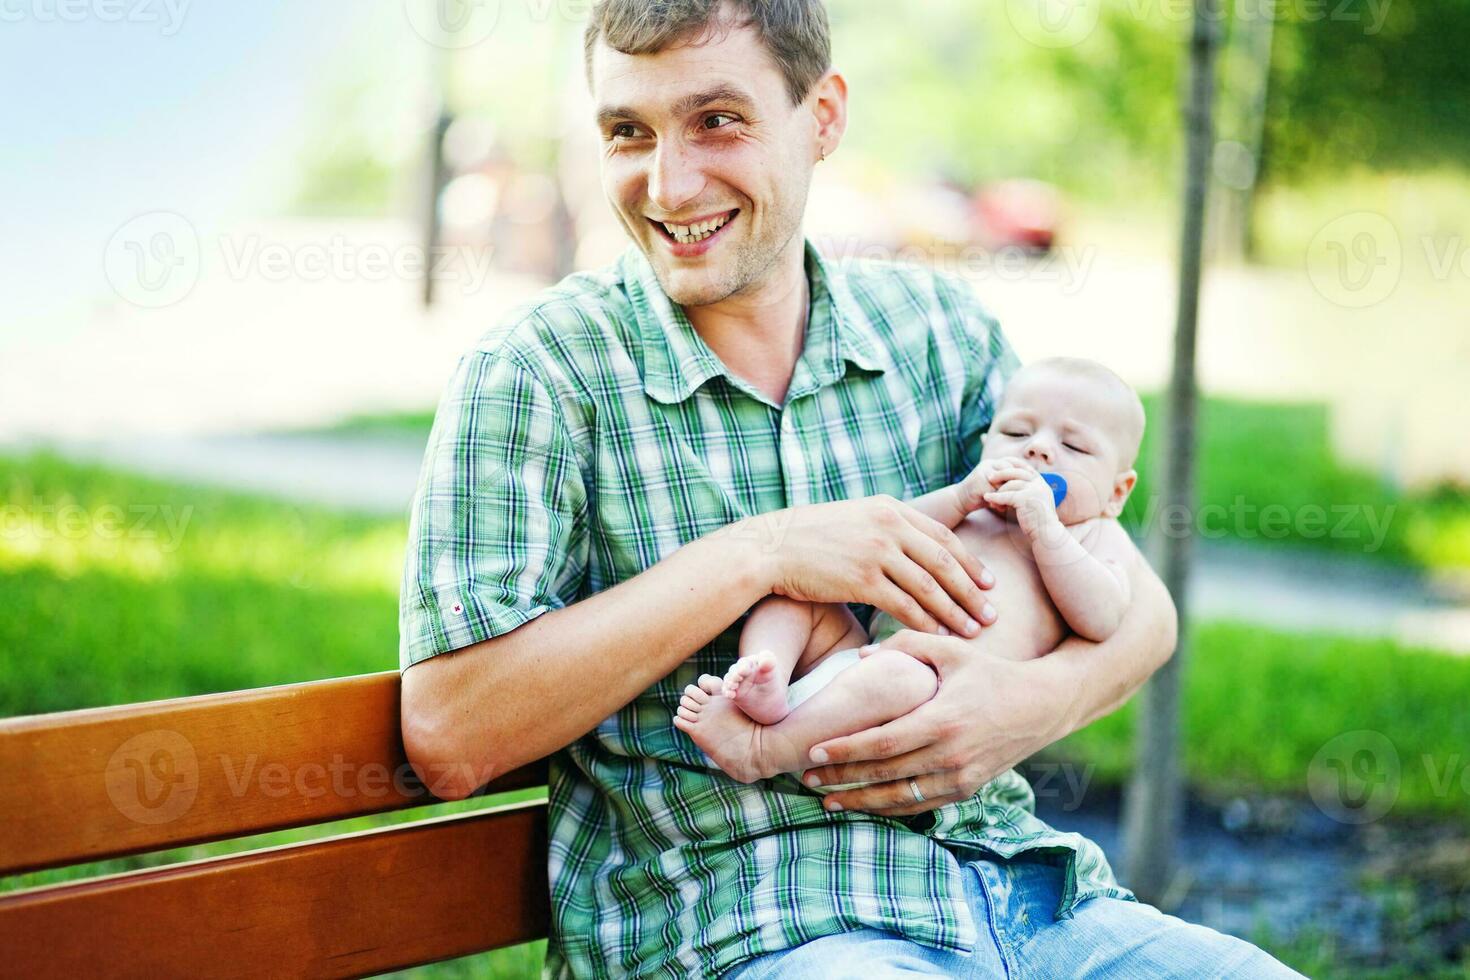 a man sitting on a bench holding a baby photo